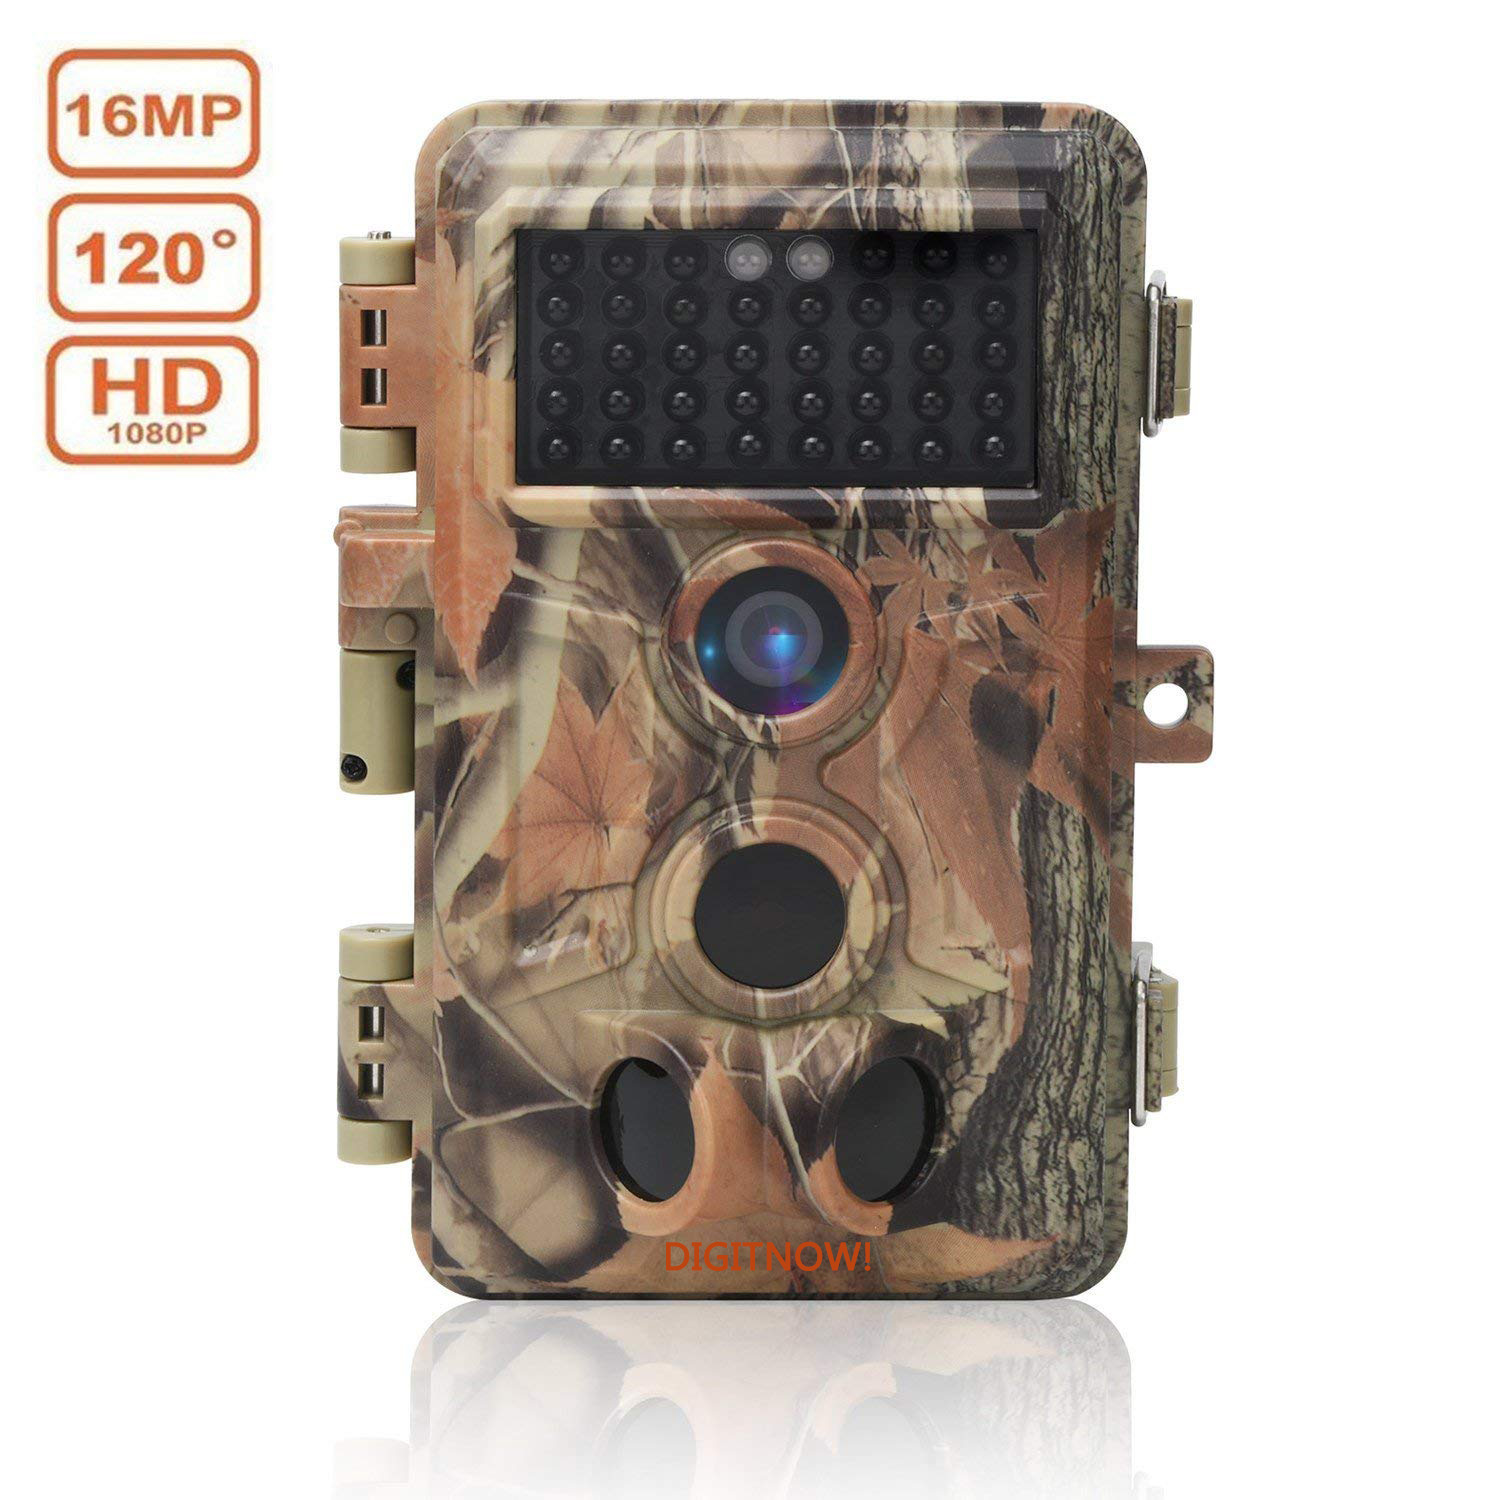 DIGITNOW 16MP 1080P HD Waterproof Trail &Surveillance Digital Camera with Infrared Night Version up to 65ft in 2.4''LCD Screen &40pcs IR LEDs Wildlife Hunting &Scouting Camera